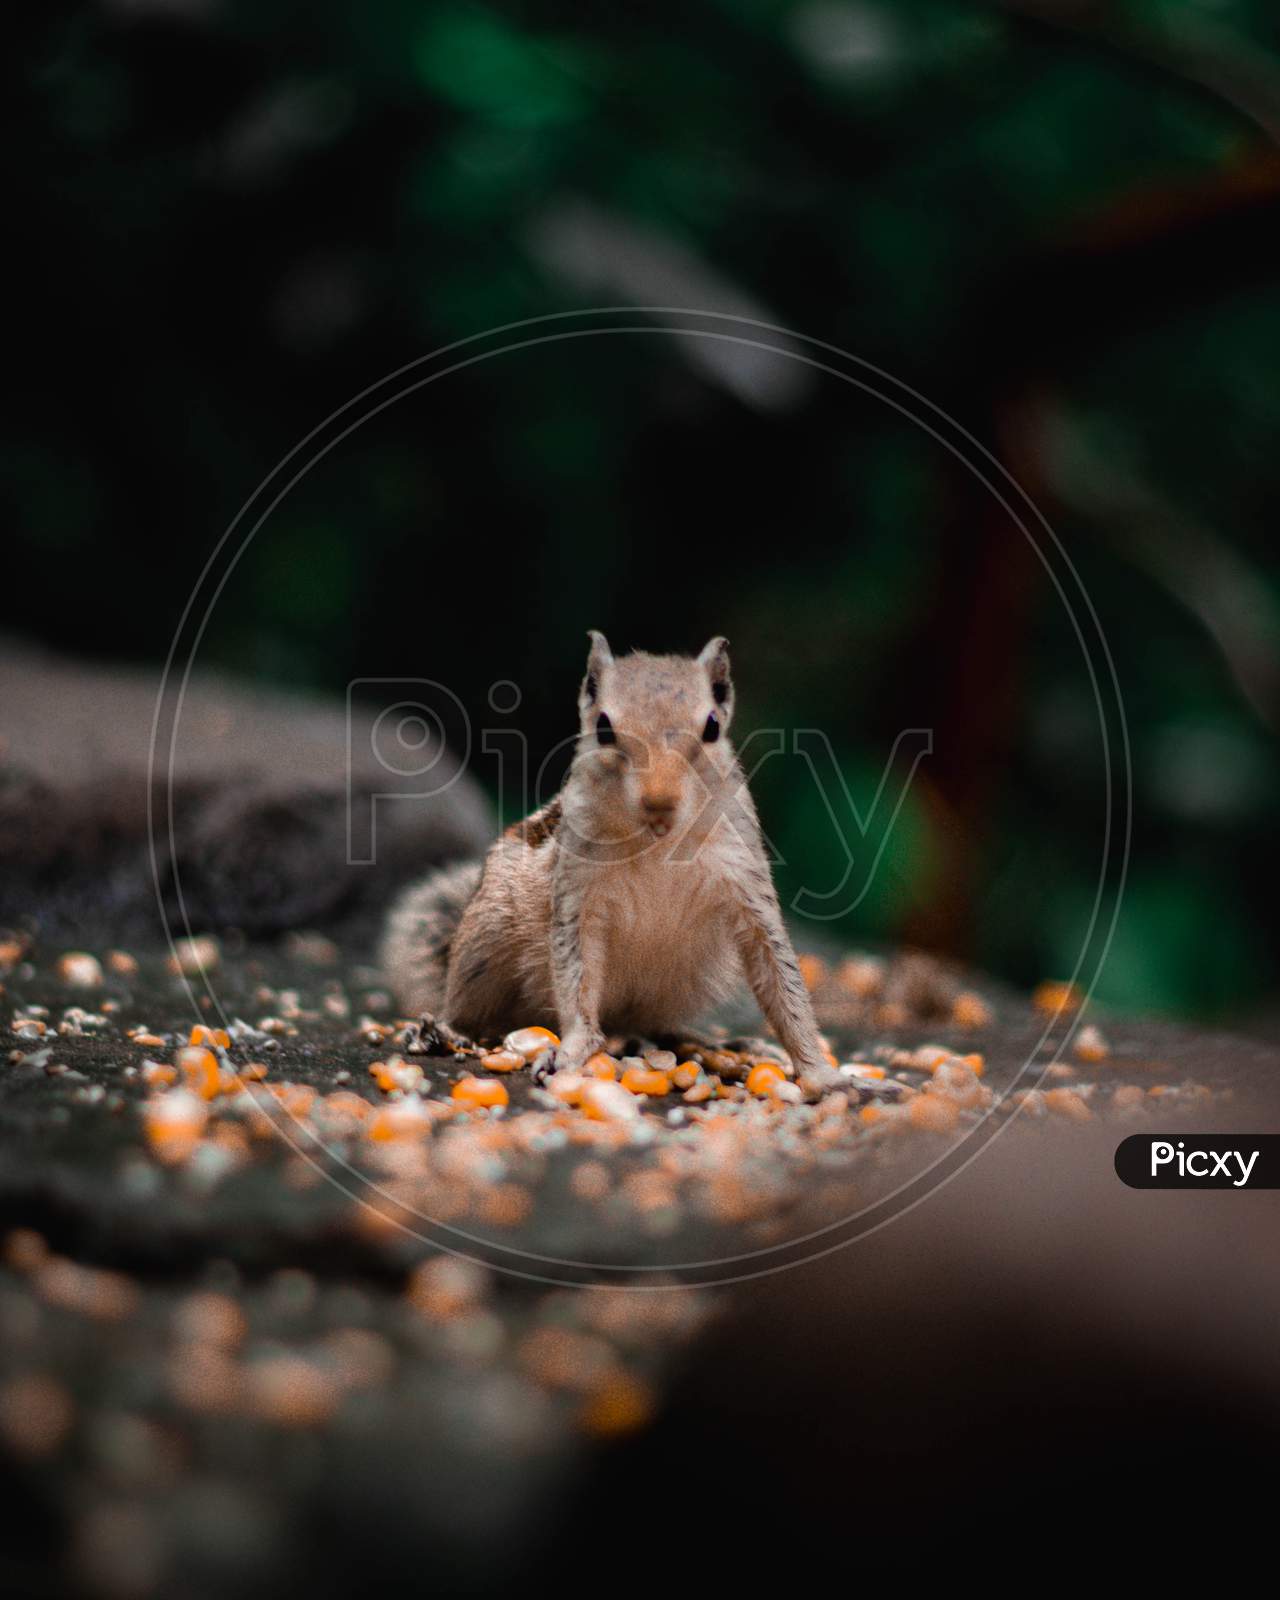 Squirrel got disturbed by the photographer